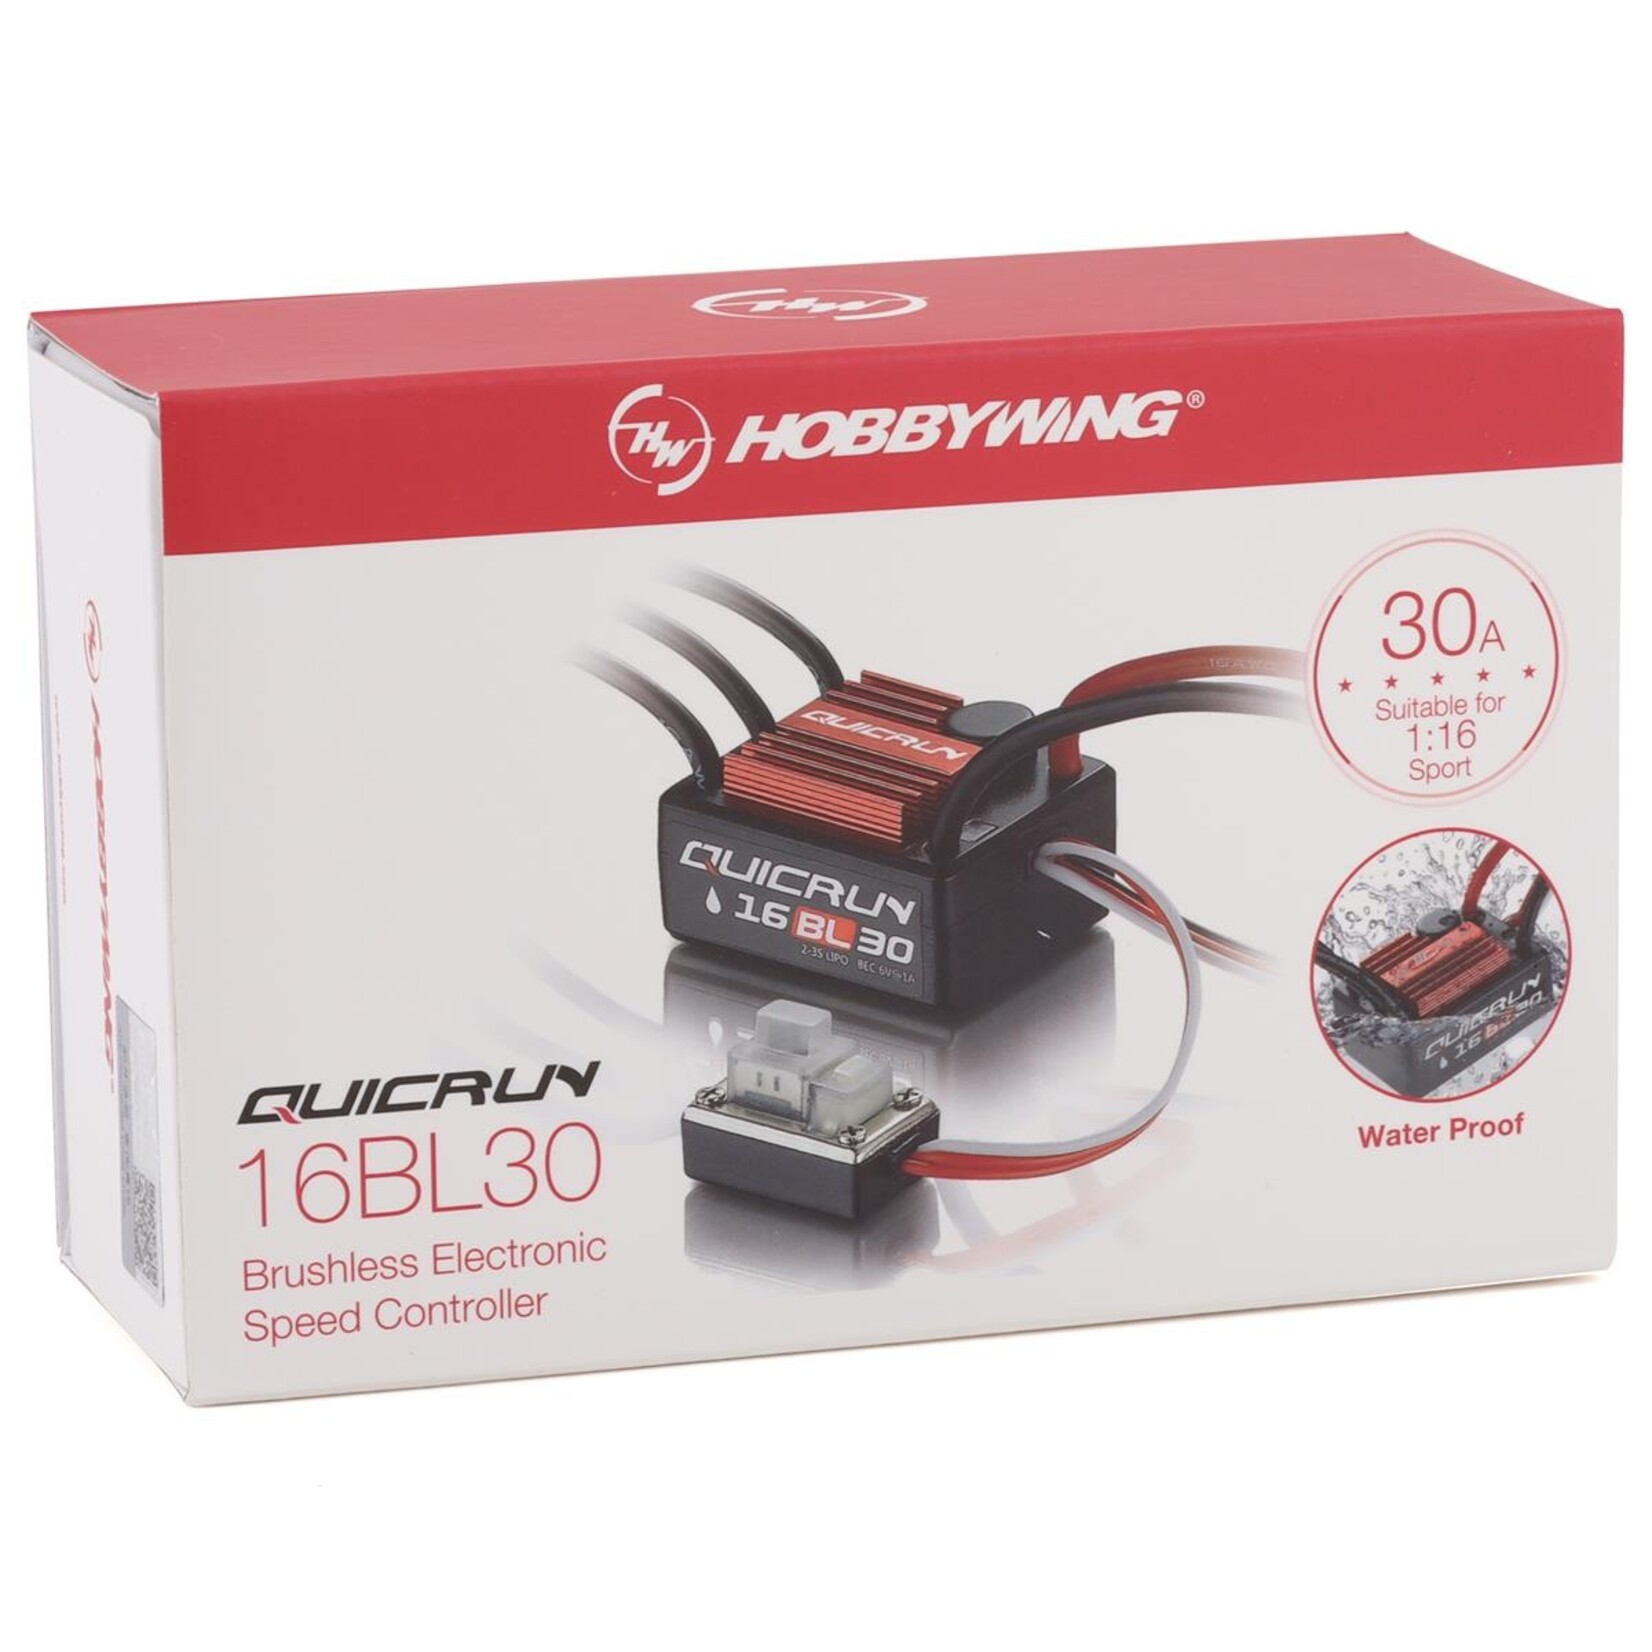 Hobbywing Hobbywing Quicrun WP-16BL30 Waterproof 1/18th Scale Brushless ESC #30110000